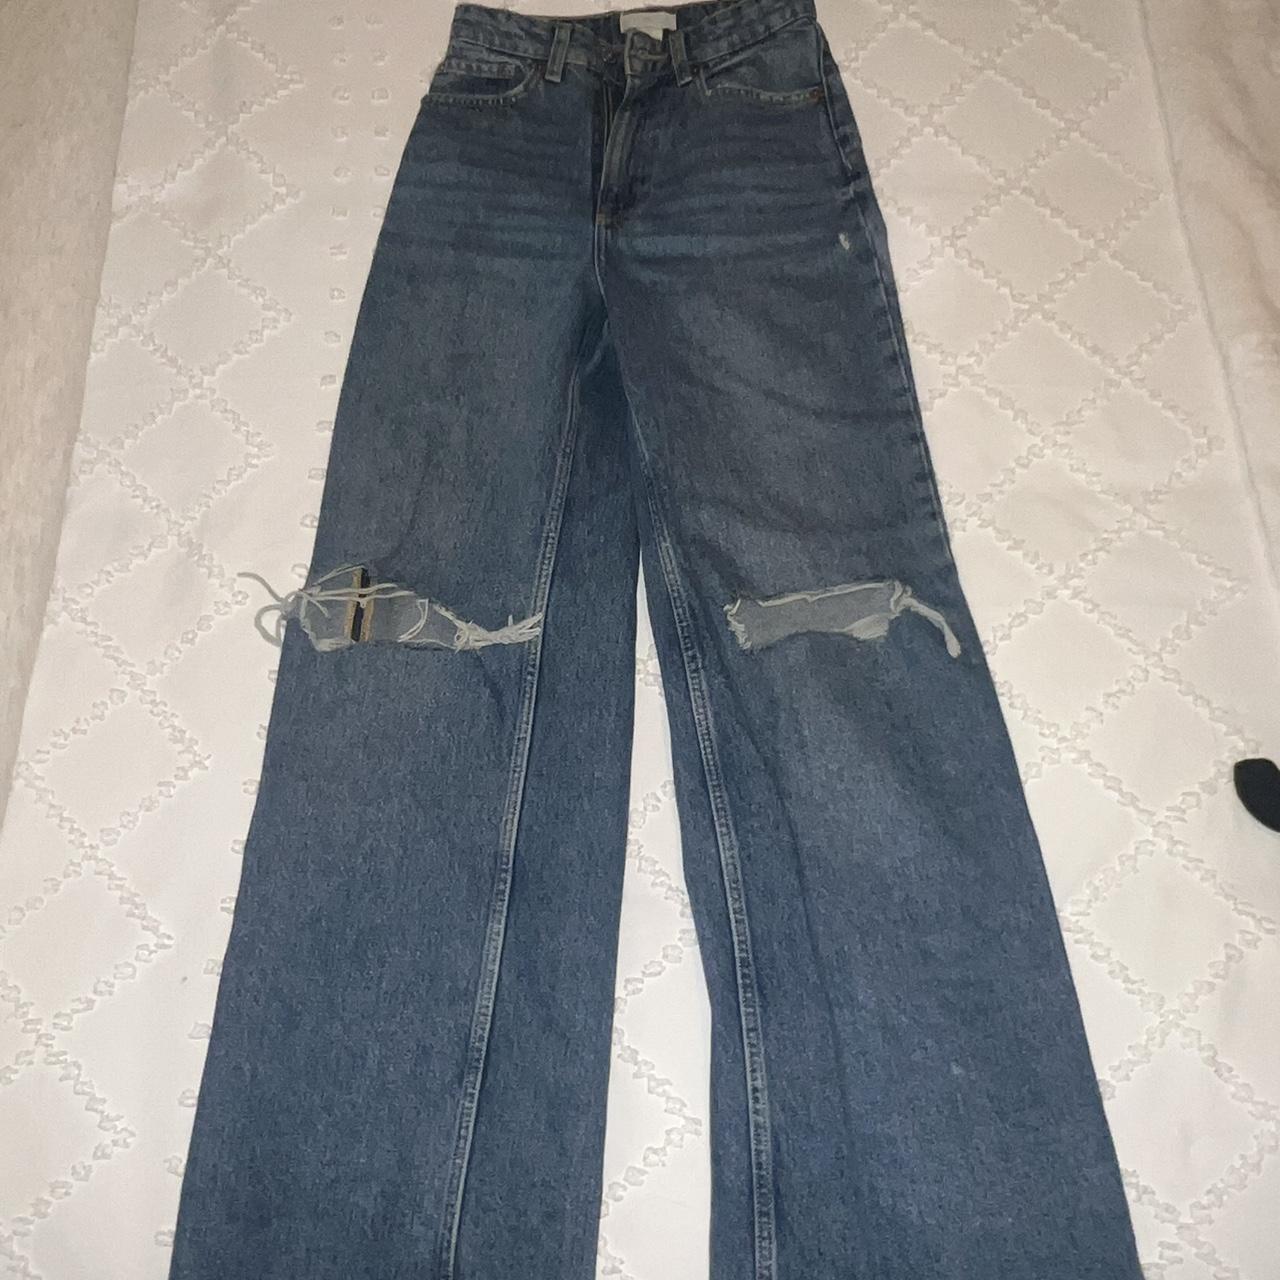 Wide H&M straight leg jeans Loved these jeans, not... - Depop